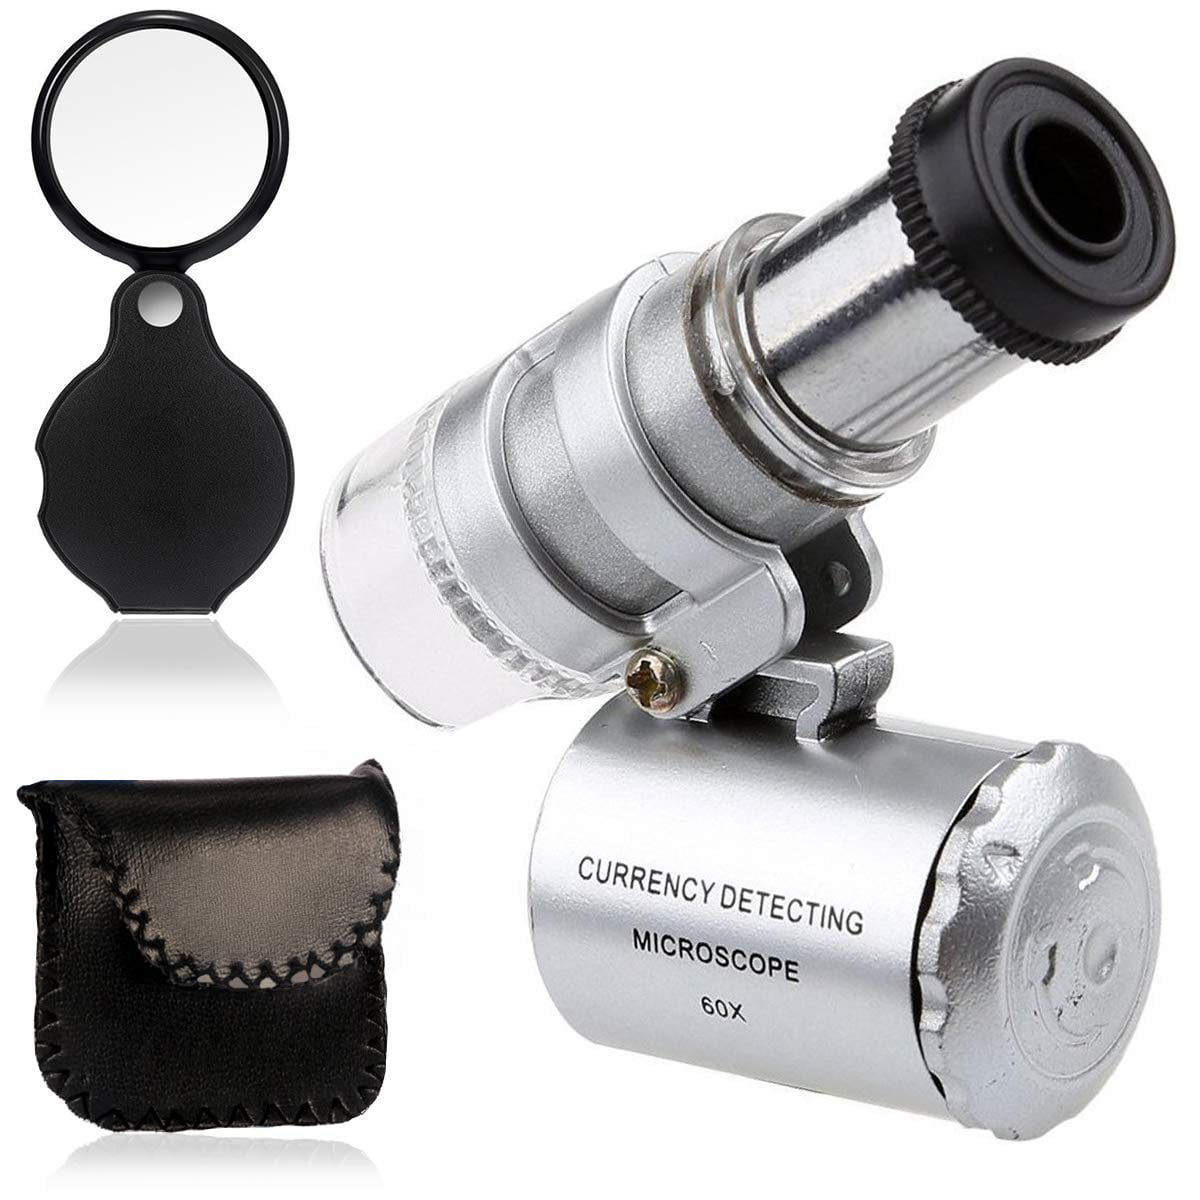 Stamps Gems etc. 40x Jewelers Loupe Magnifier with Light Jewelry Magnifier Loop with UV LED Light Pocket Magnifying Glass Eye Ultra Violet for Coins Watches Currency Detection Diamonds 